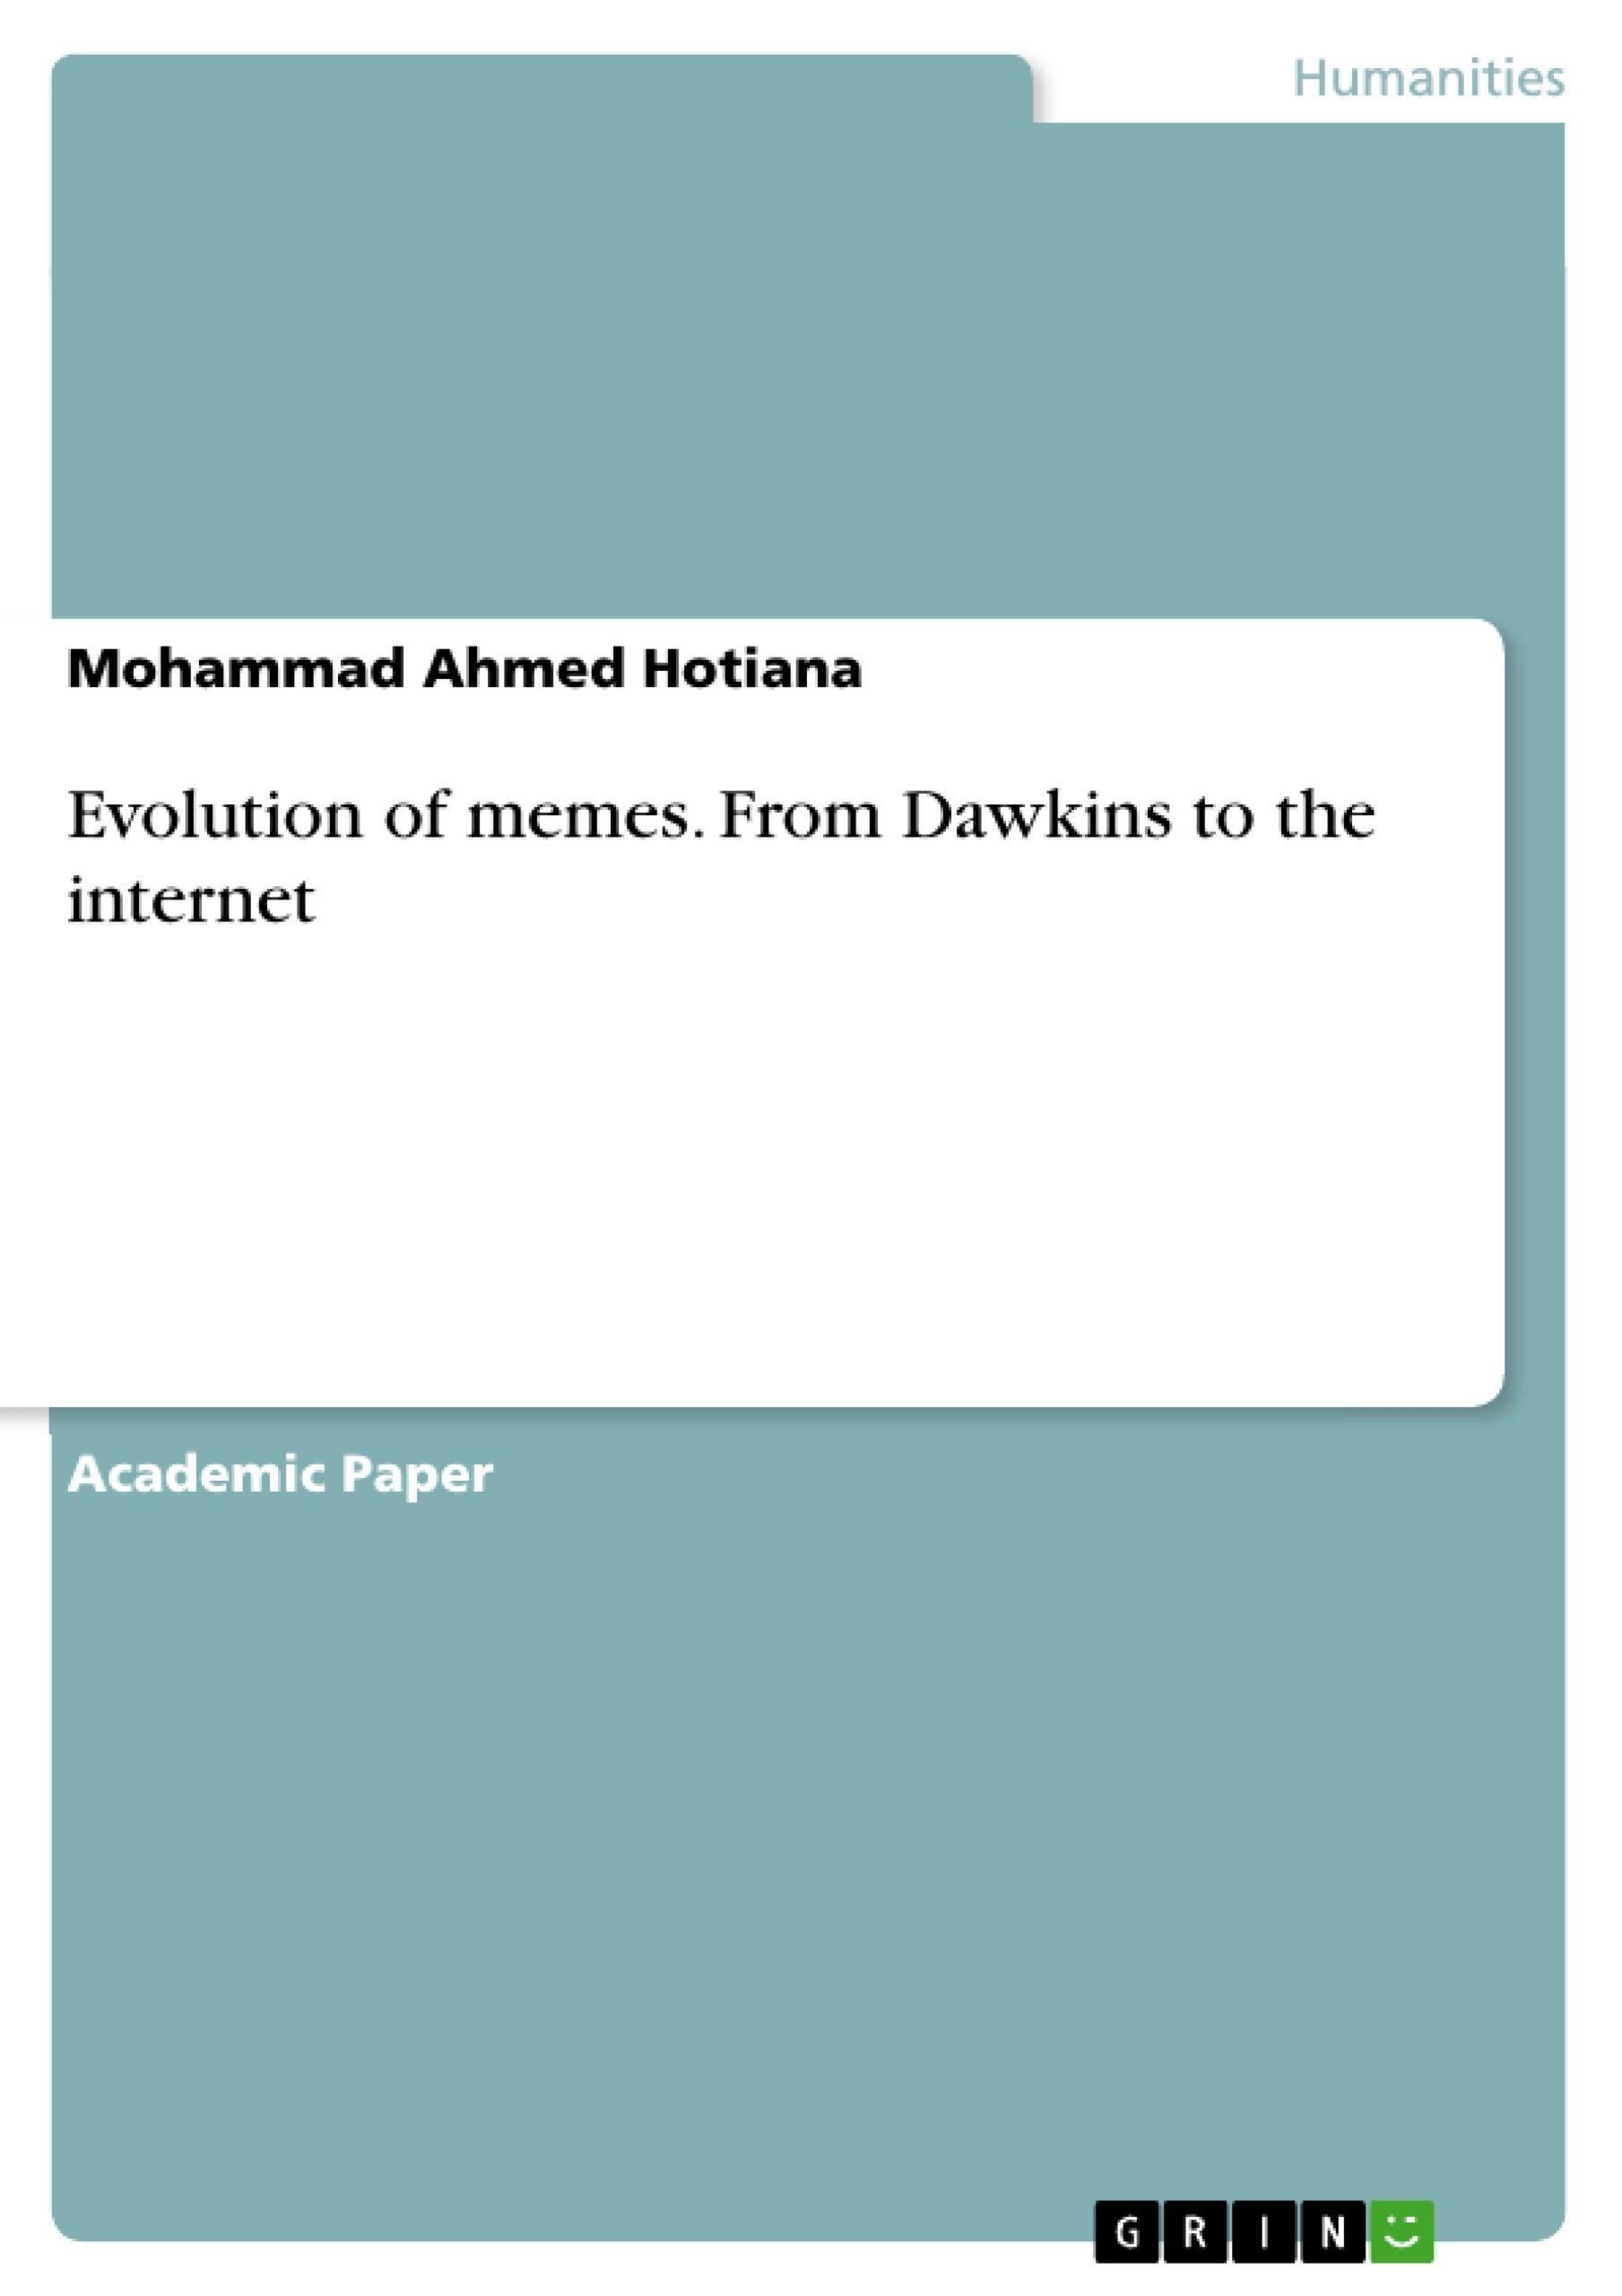 Title: Evolution of memes. From Dawkins to the internet